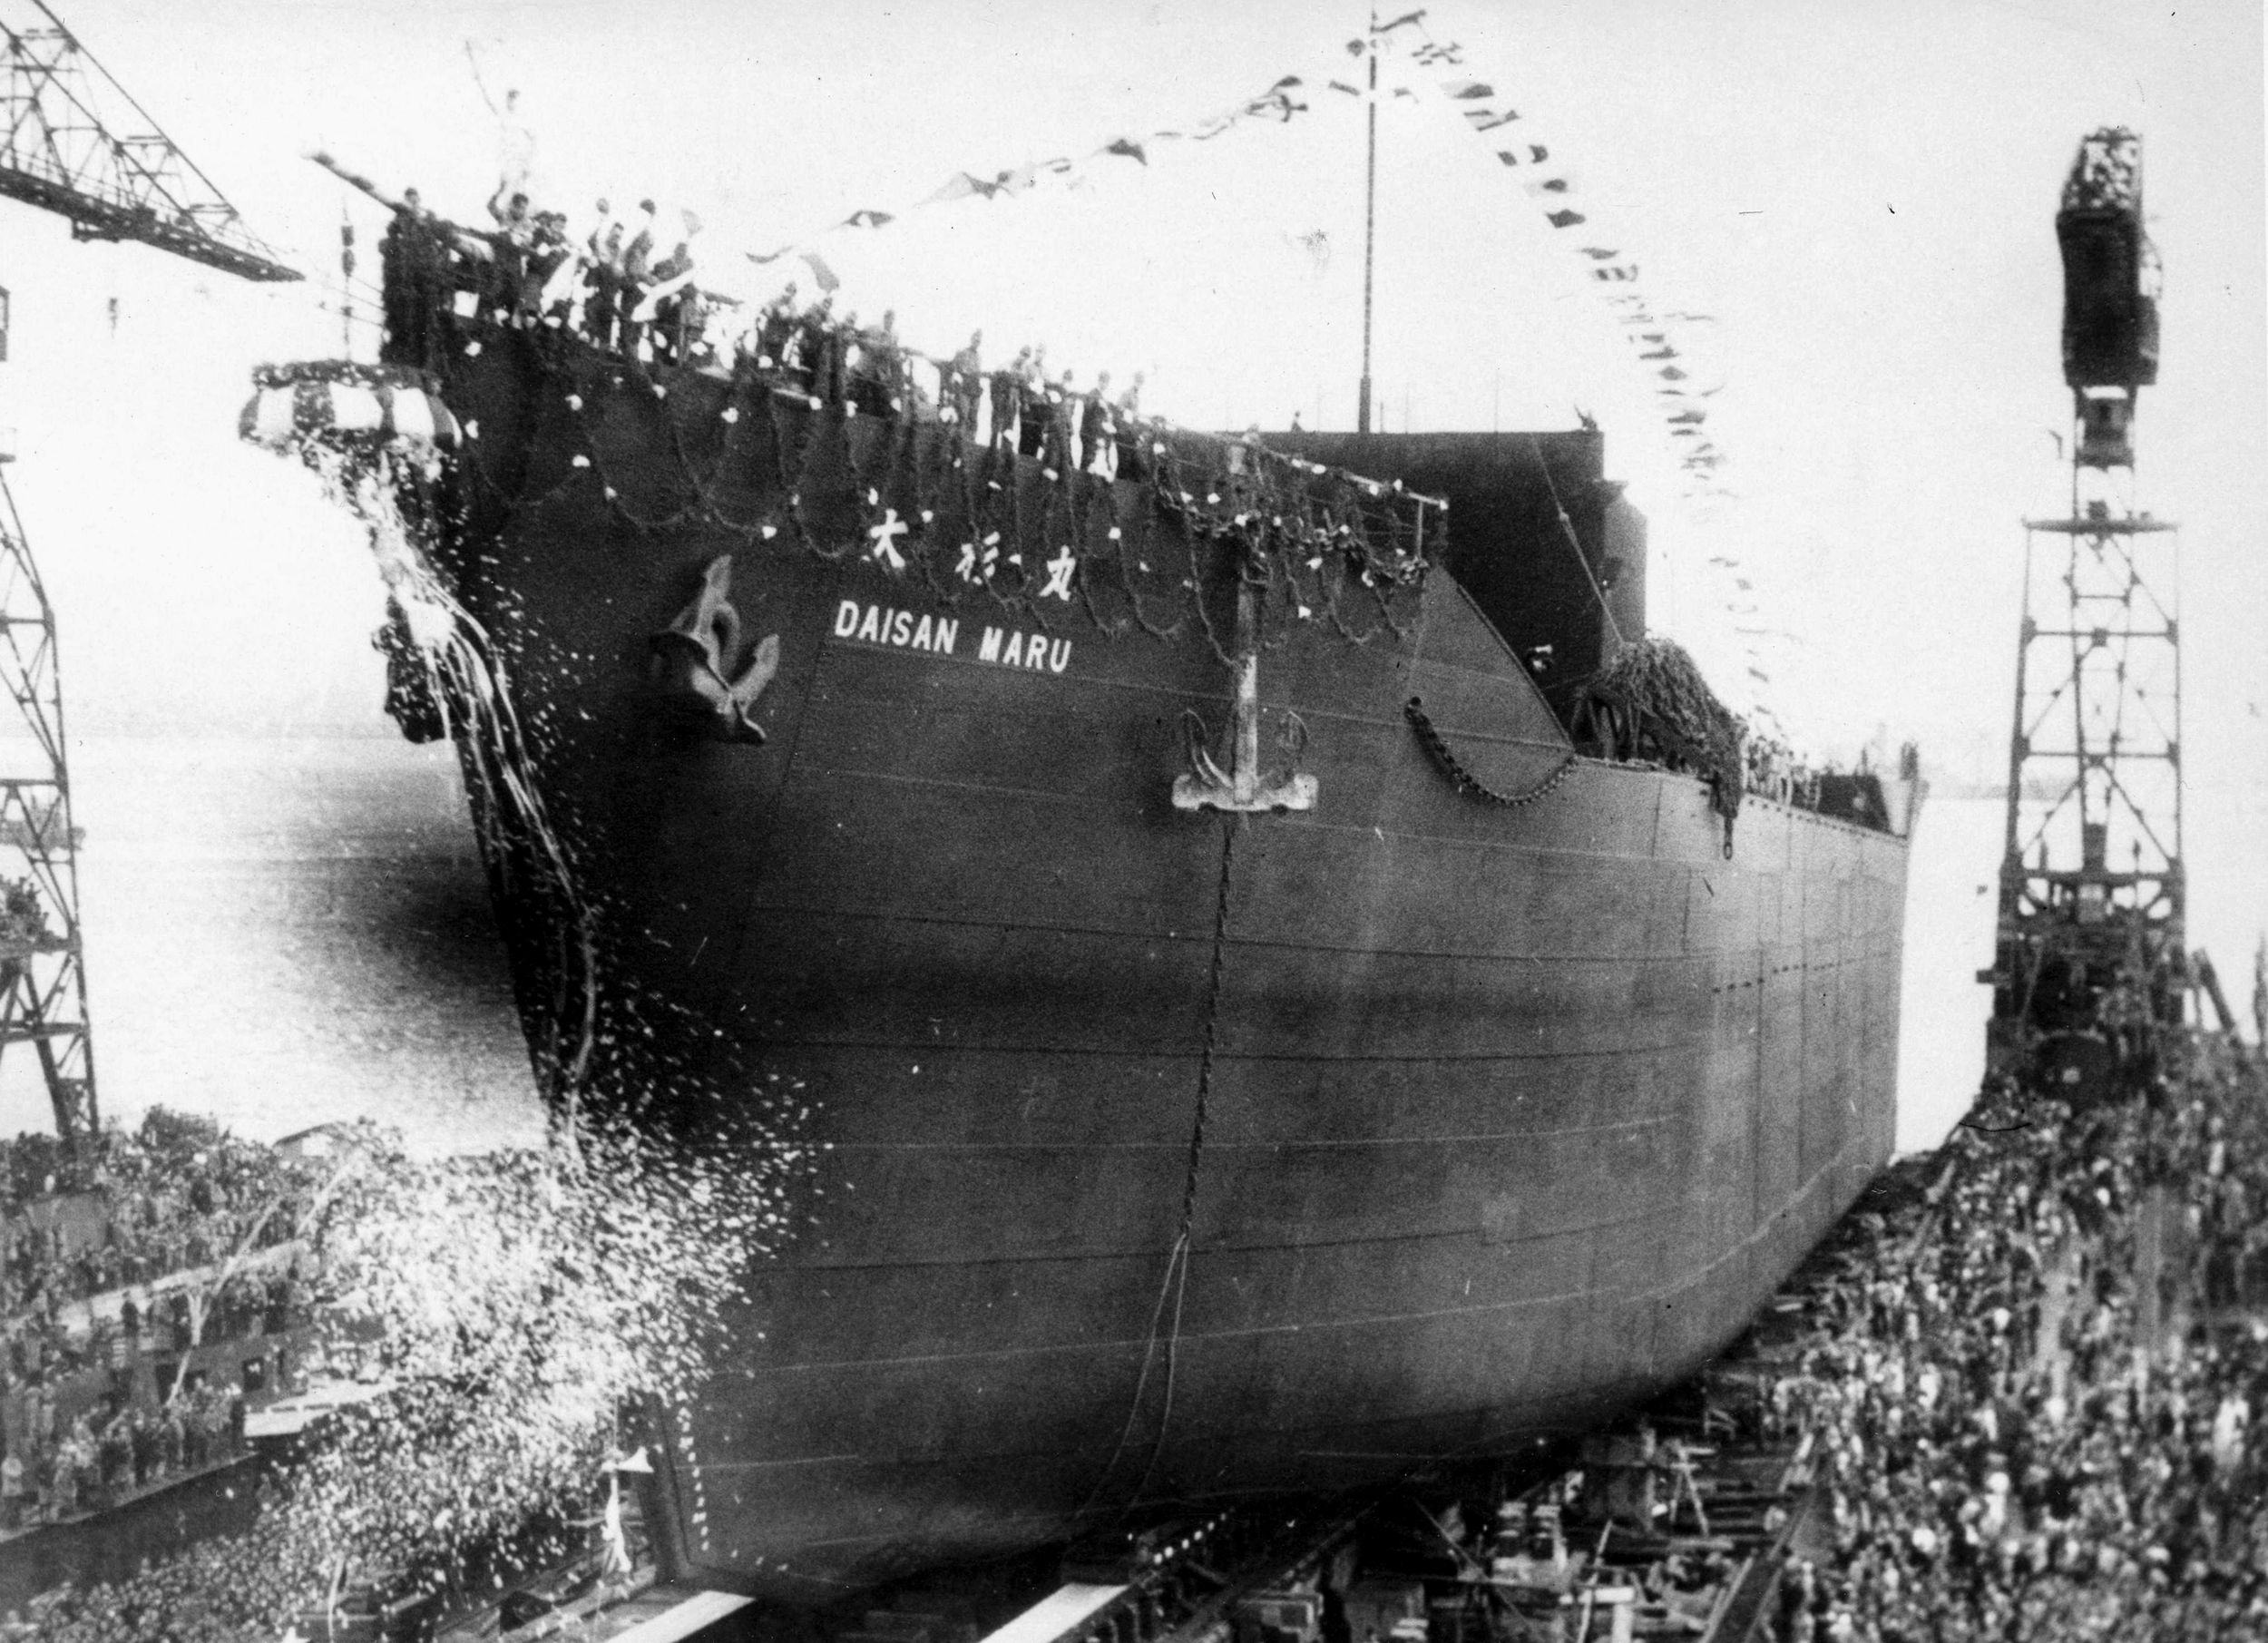 The freighter Daisan Maru is shown during its launching at the Mitsubishi shipyard. The vessel was one of the largest in the Japanese merchant fleet, which was decimated during the Pacific War. 